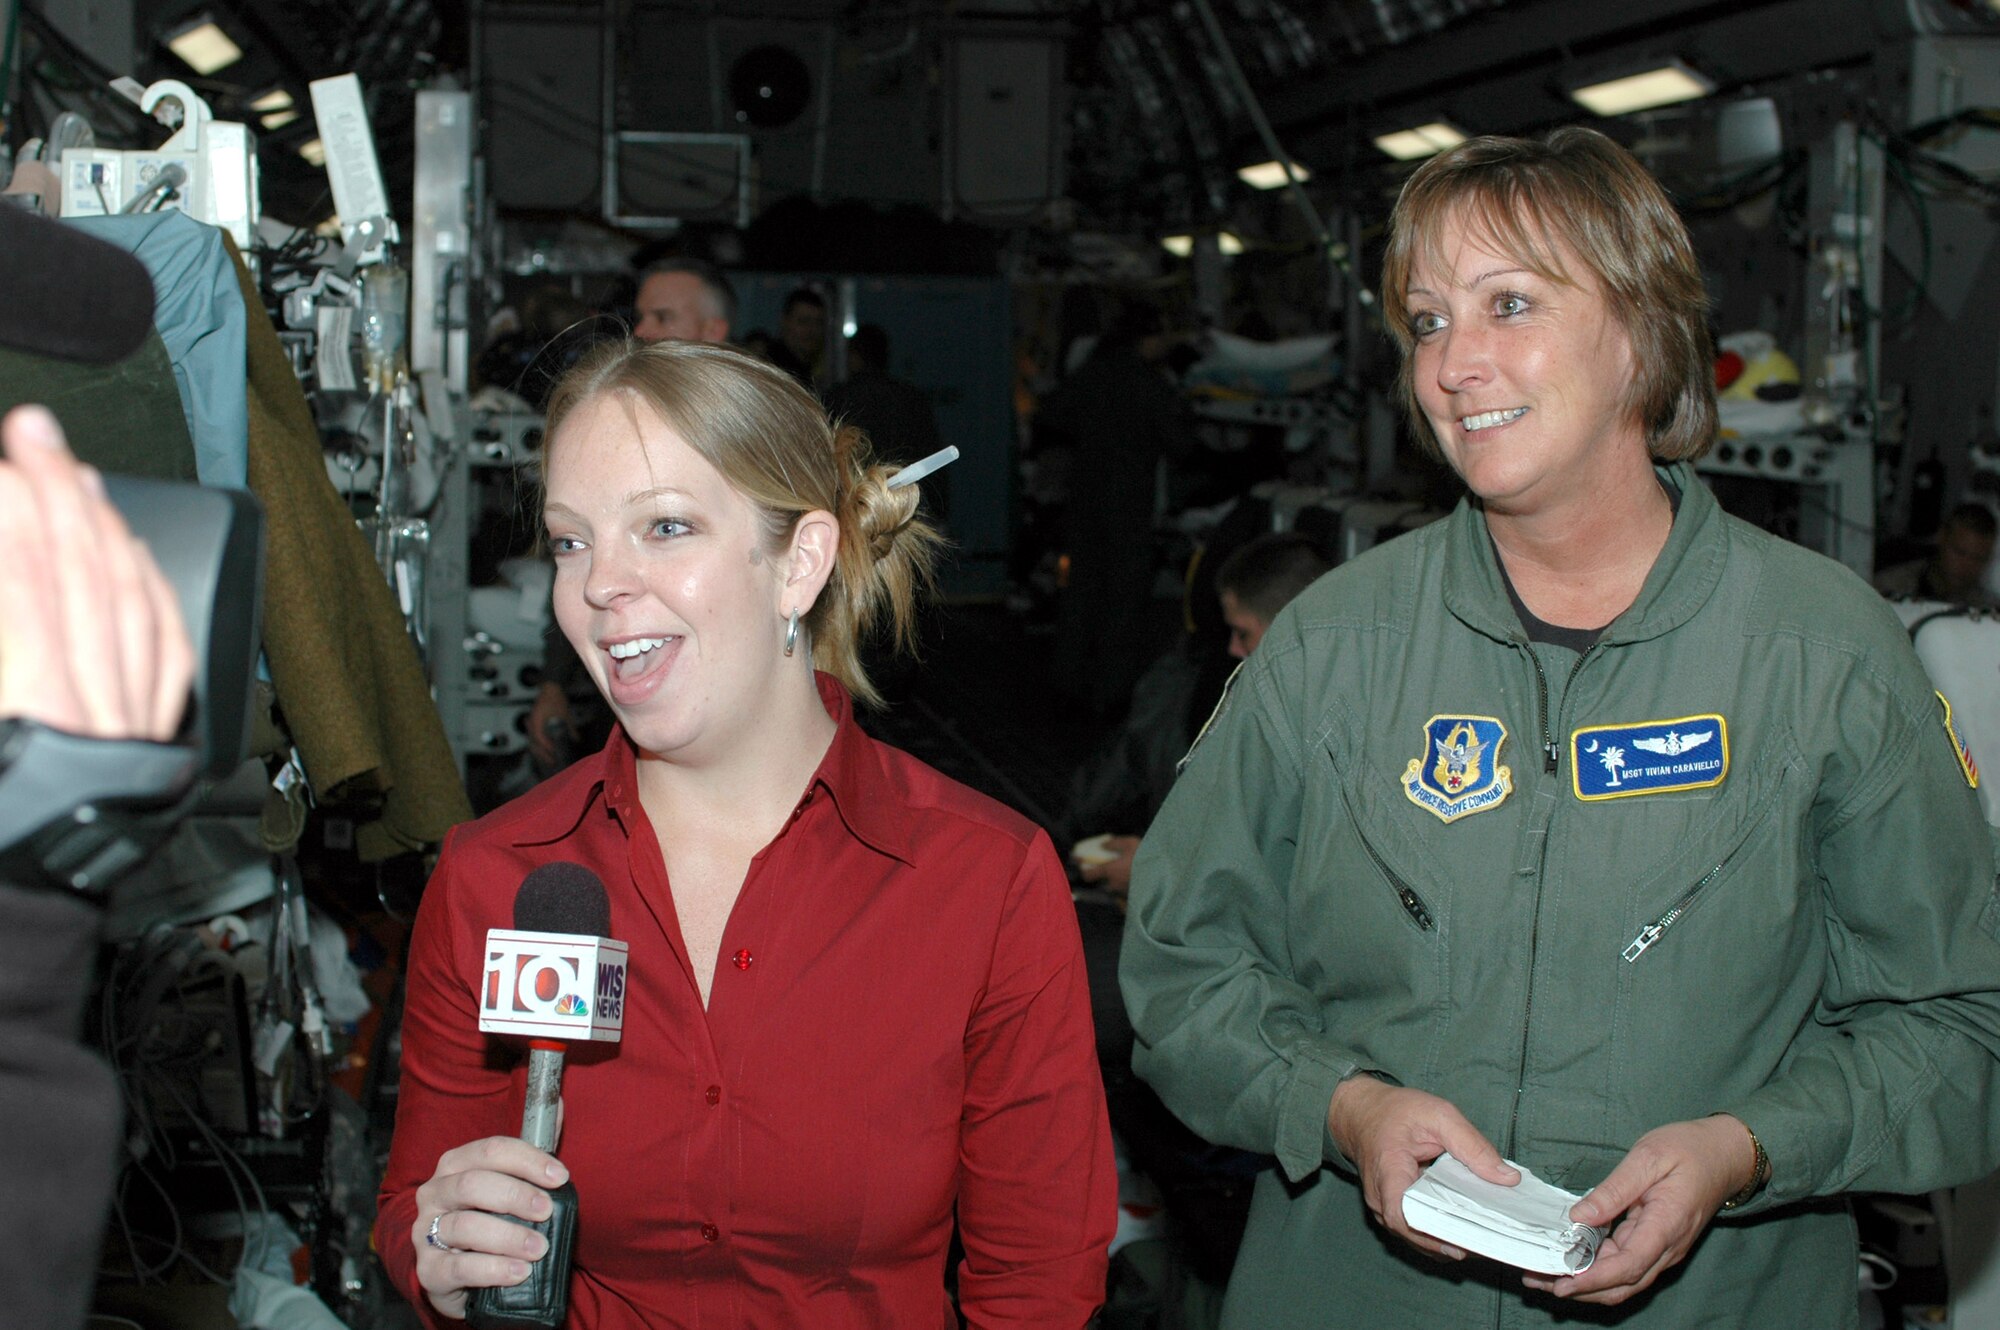 Stefanie Caraviello (left), the senior producer for WIS-TV in Columbia, S.C., interviews her mother, Master Sgt. Vivian Caraviello, a reservist with the 315th Aeromedical Evacuation Squadron at Charleston Air Force Base, S.C. Both Caraviellos were on a recent aeromedical evacuation mission; the mother caring for patients and the daughter telling the story. (U.S. Air Force photo/Capt. Wayne Capps)